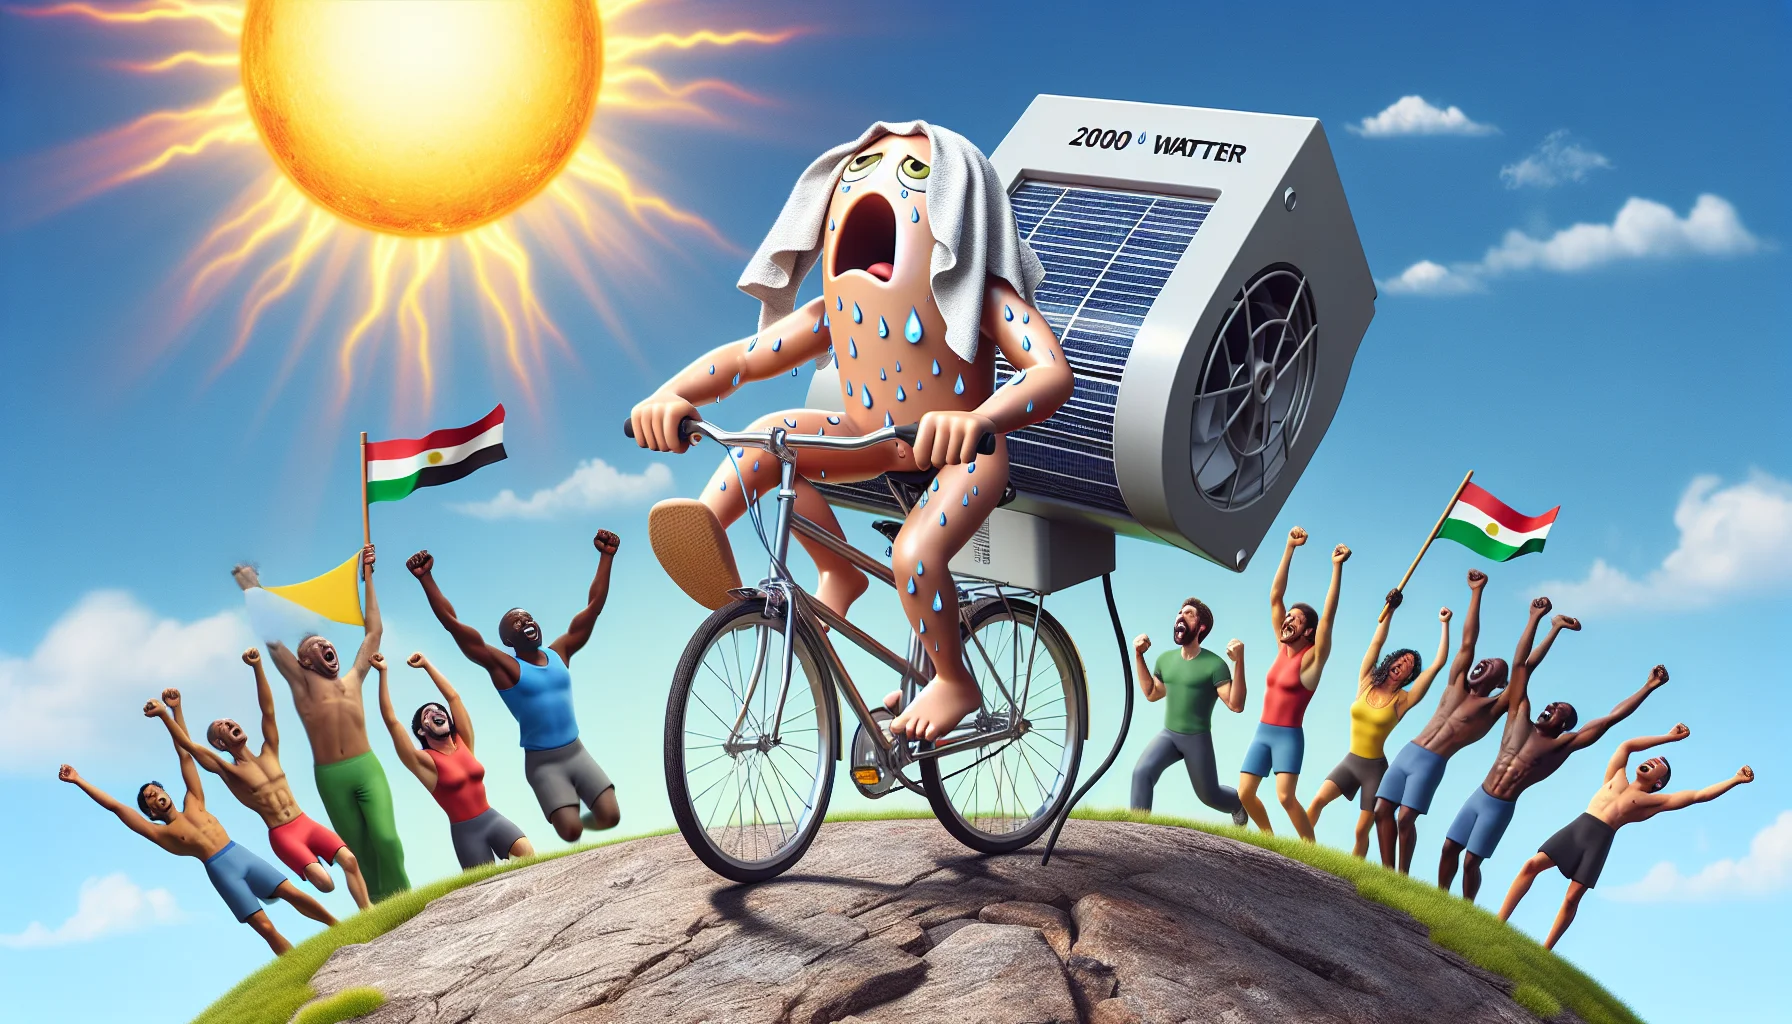 Generate a comedic illustration featuring a 2000 Watt Filter device engaged in a human-like scenario to encourage electricity production. Imagine this device with human arms and legs, riding a bicycle atop a hill against a sunny backdrop, playfully struggling to pedal. The filter seems to be sweating bullets, with a distressed yet determined expression on its face. In the background, are cheering onlookers of diverse ethnicities including Caucasian, Black, Hispanic, Middle-Eastern, and South Asian, nicely capturing a global unity on renewable energy. Give this image a beautiful blend of humor and meaningful imagery, emphasizing the importance of sustainable power.